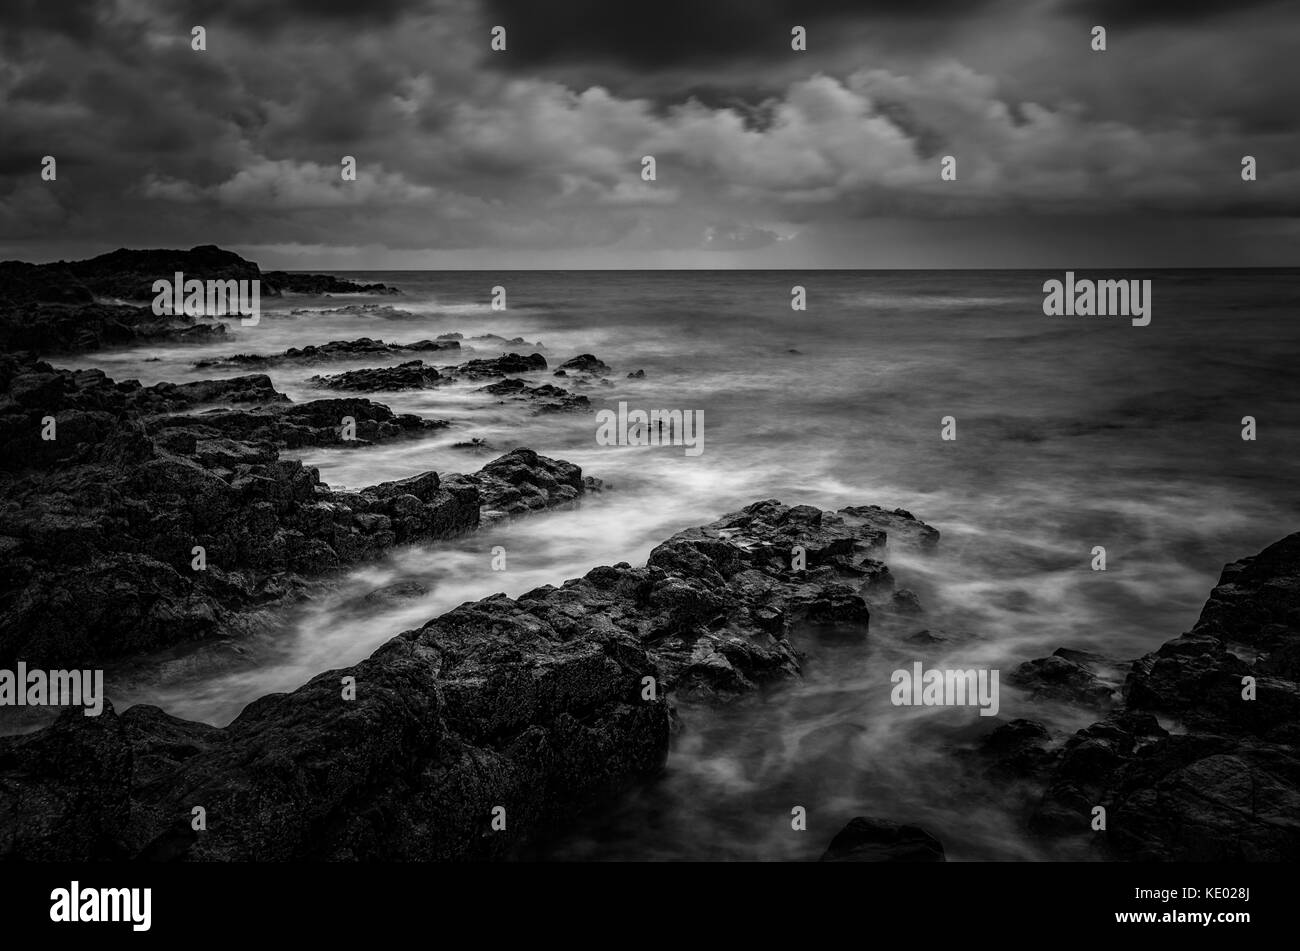 Church bay anglesey Black and White Stock Photos & Images - Alamy